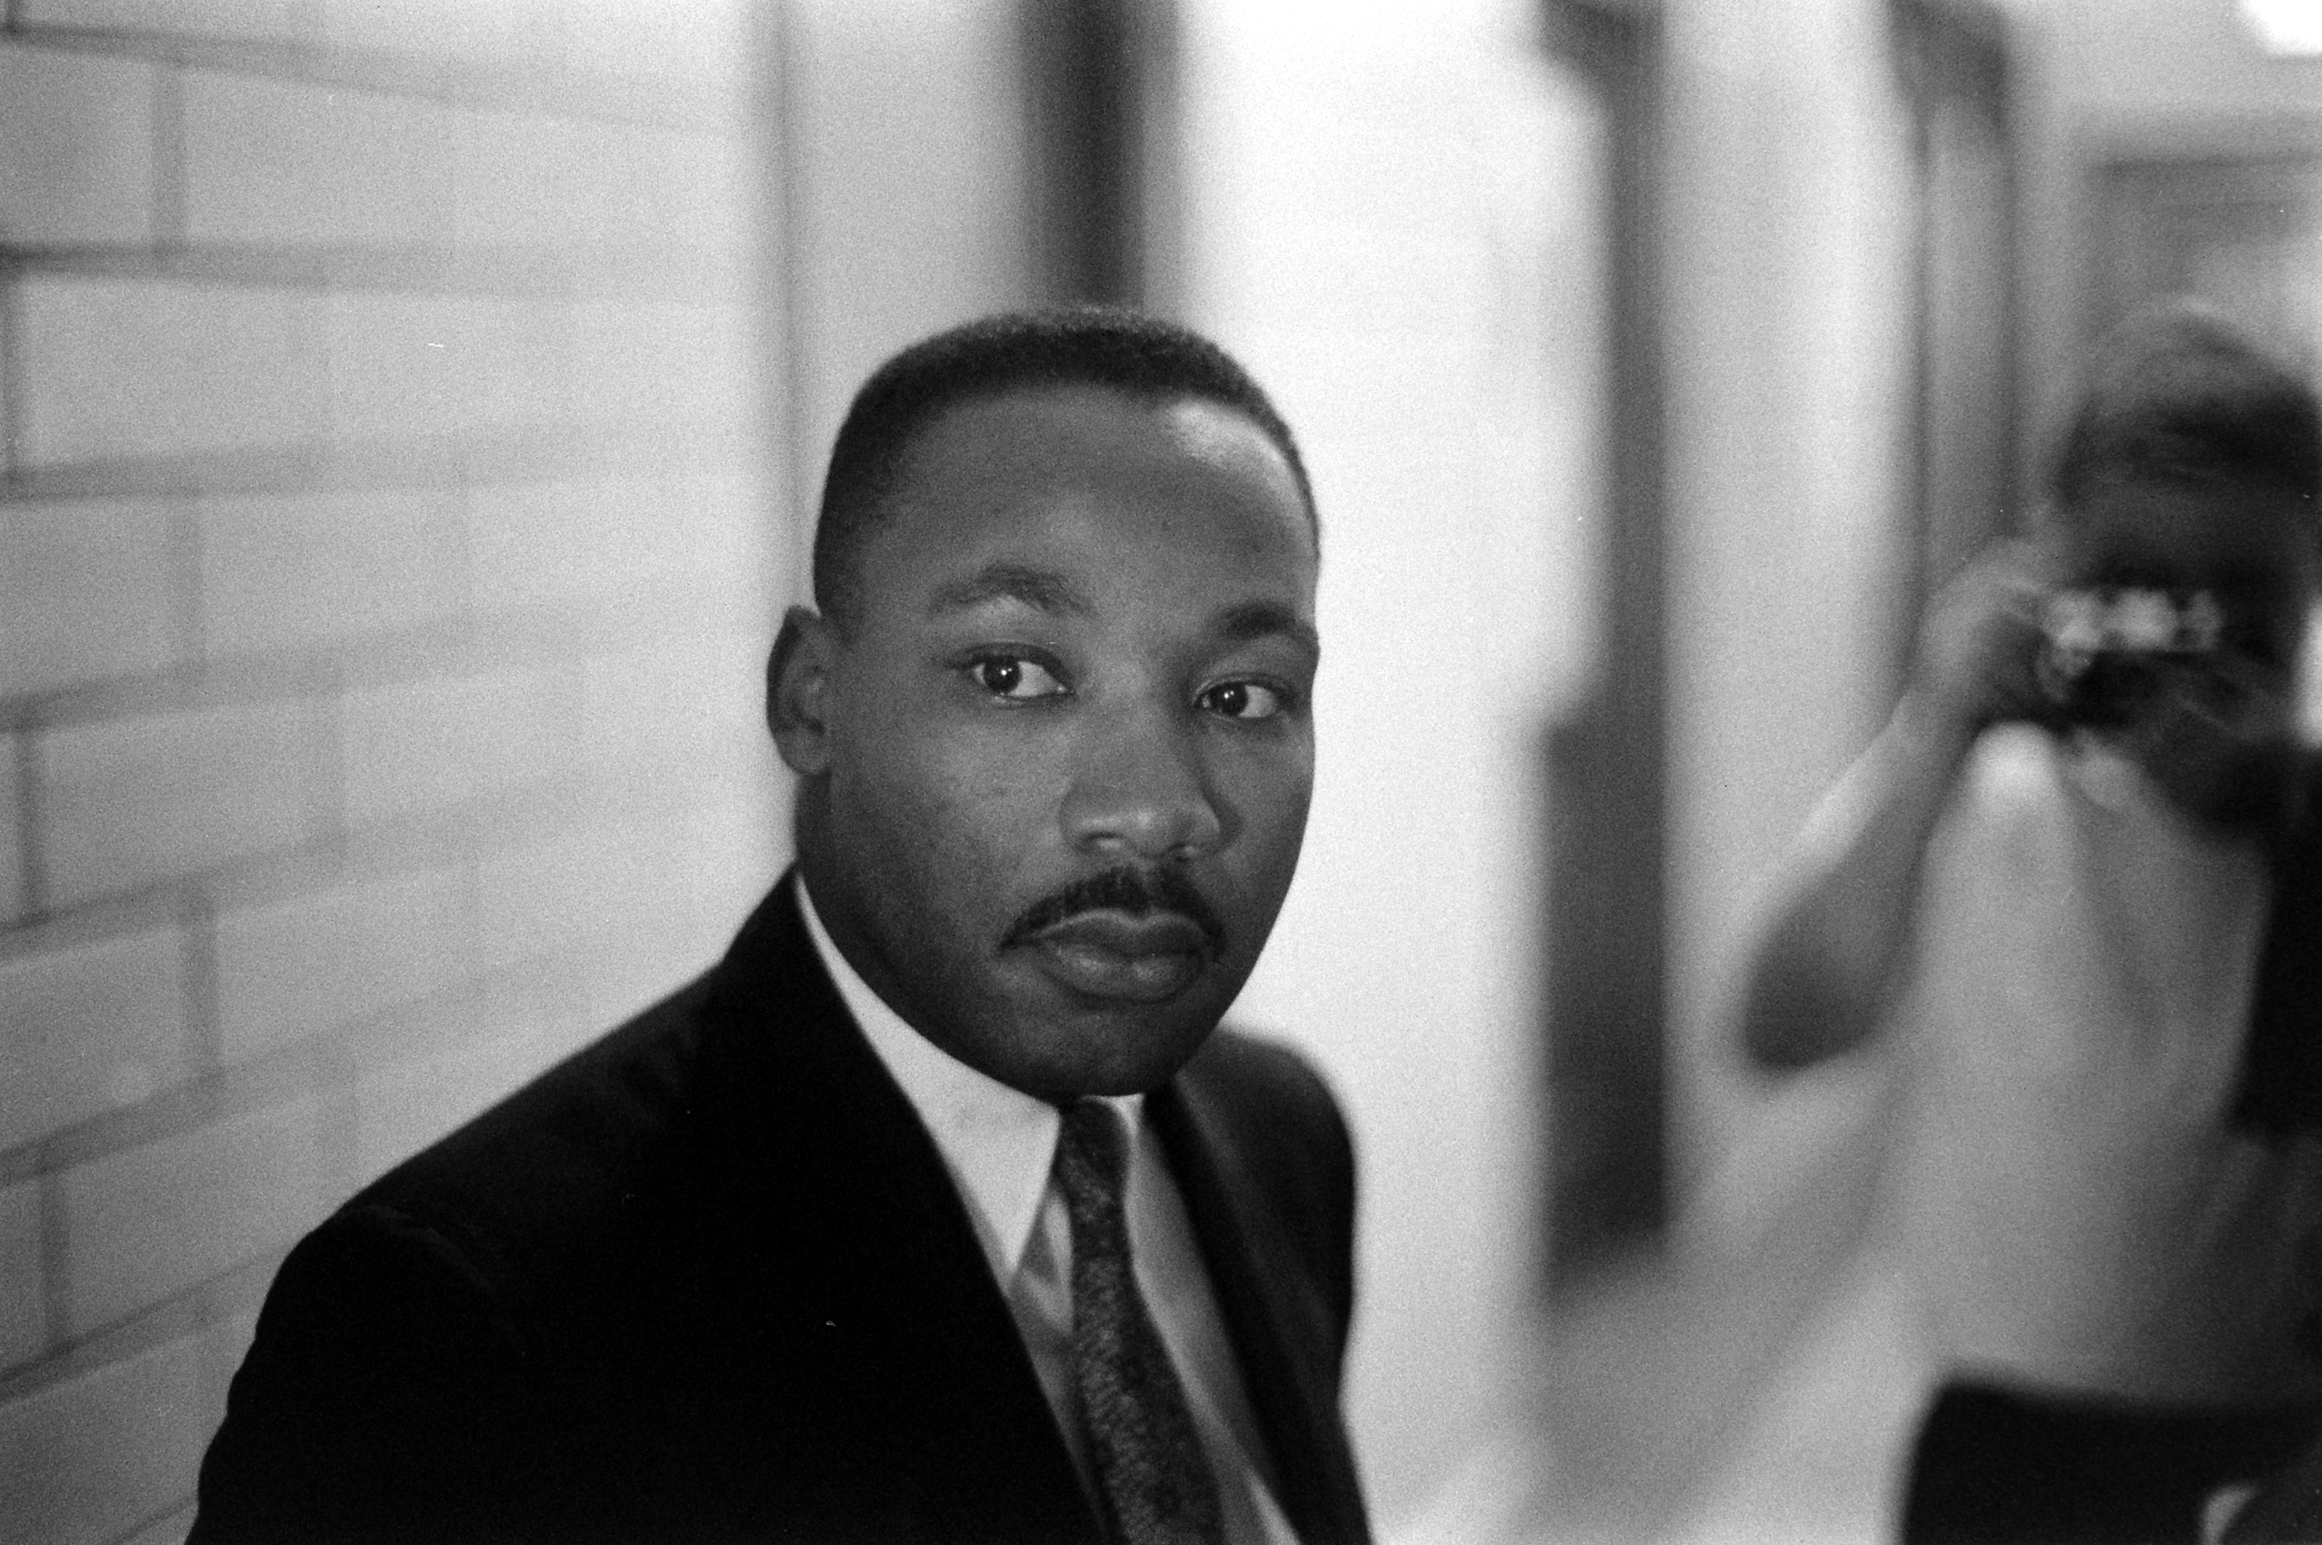 PHOTO: Martin Luther King, Jr., September 1958, in Montgomery, Ala.